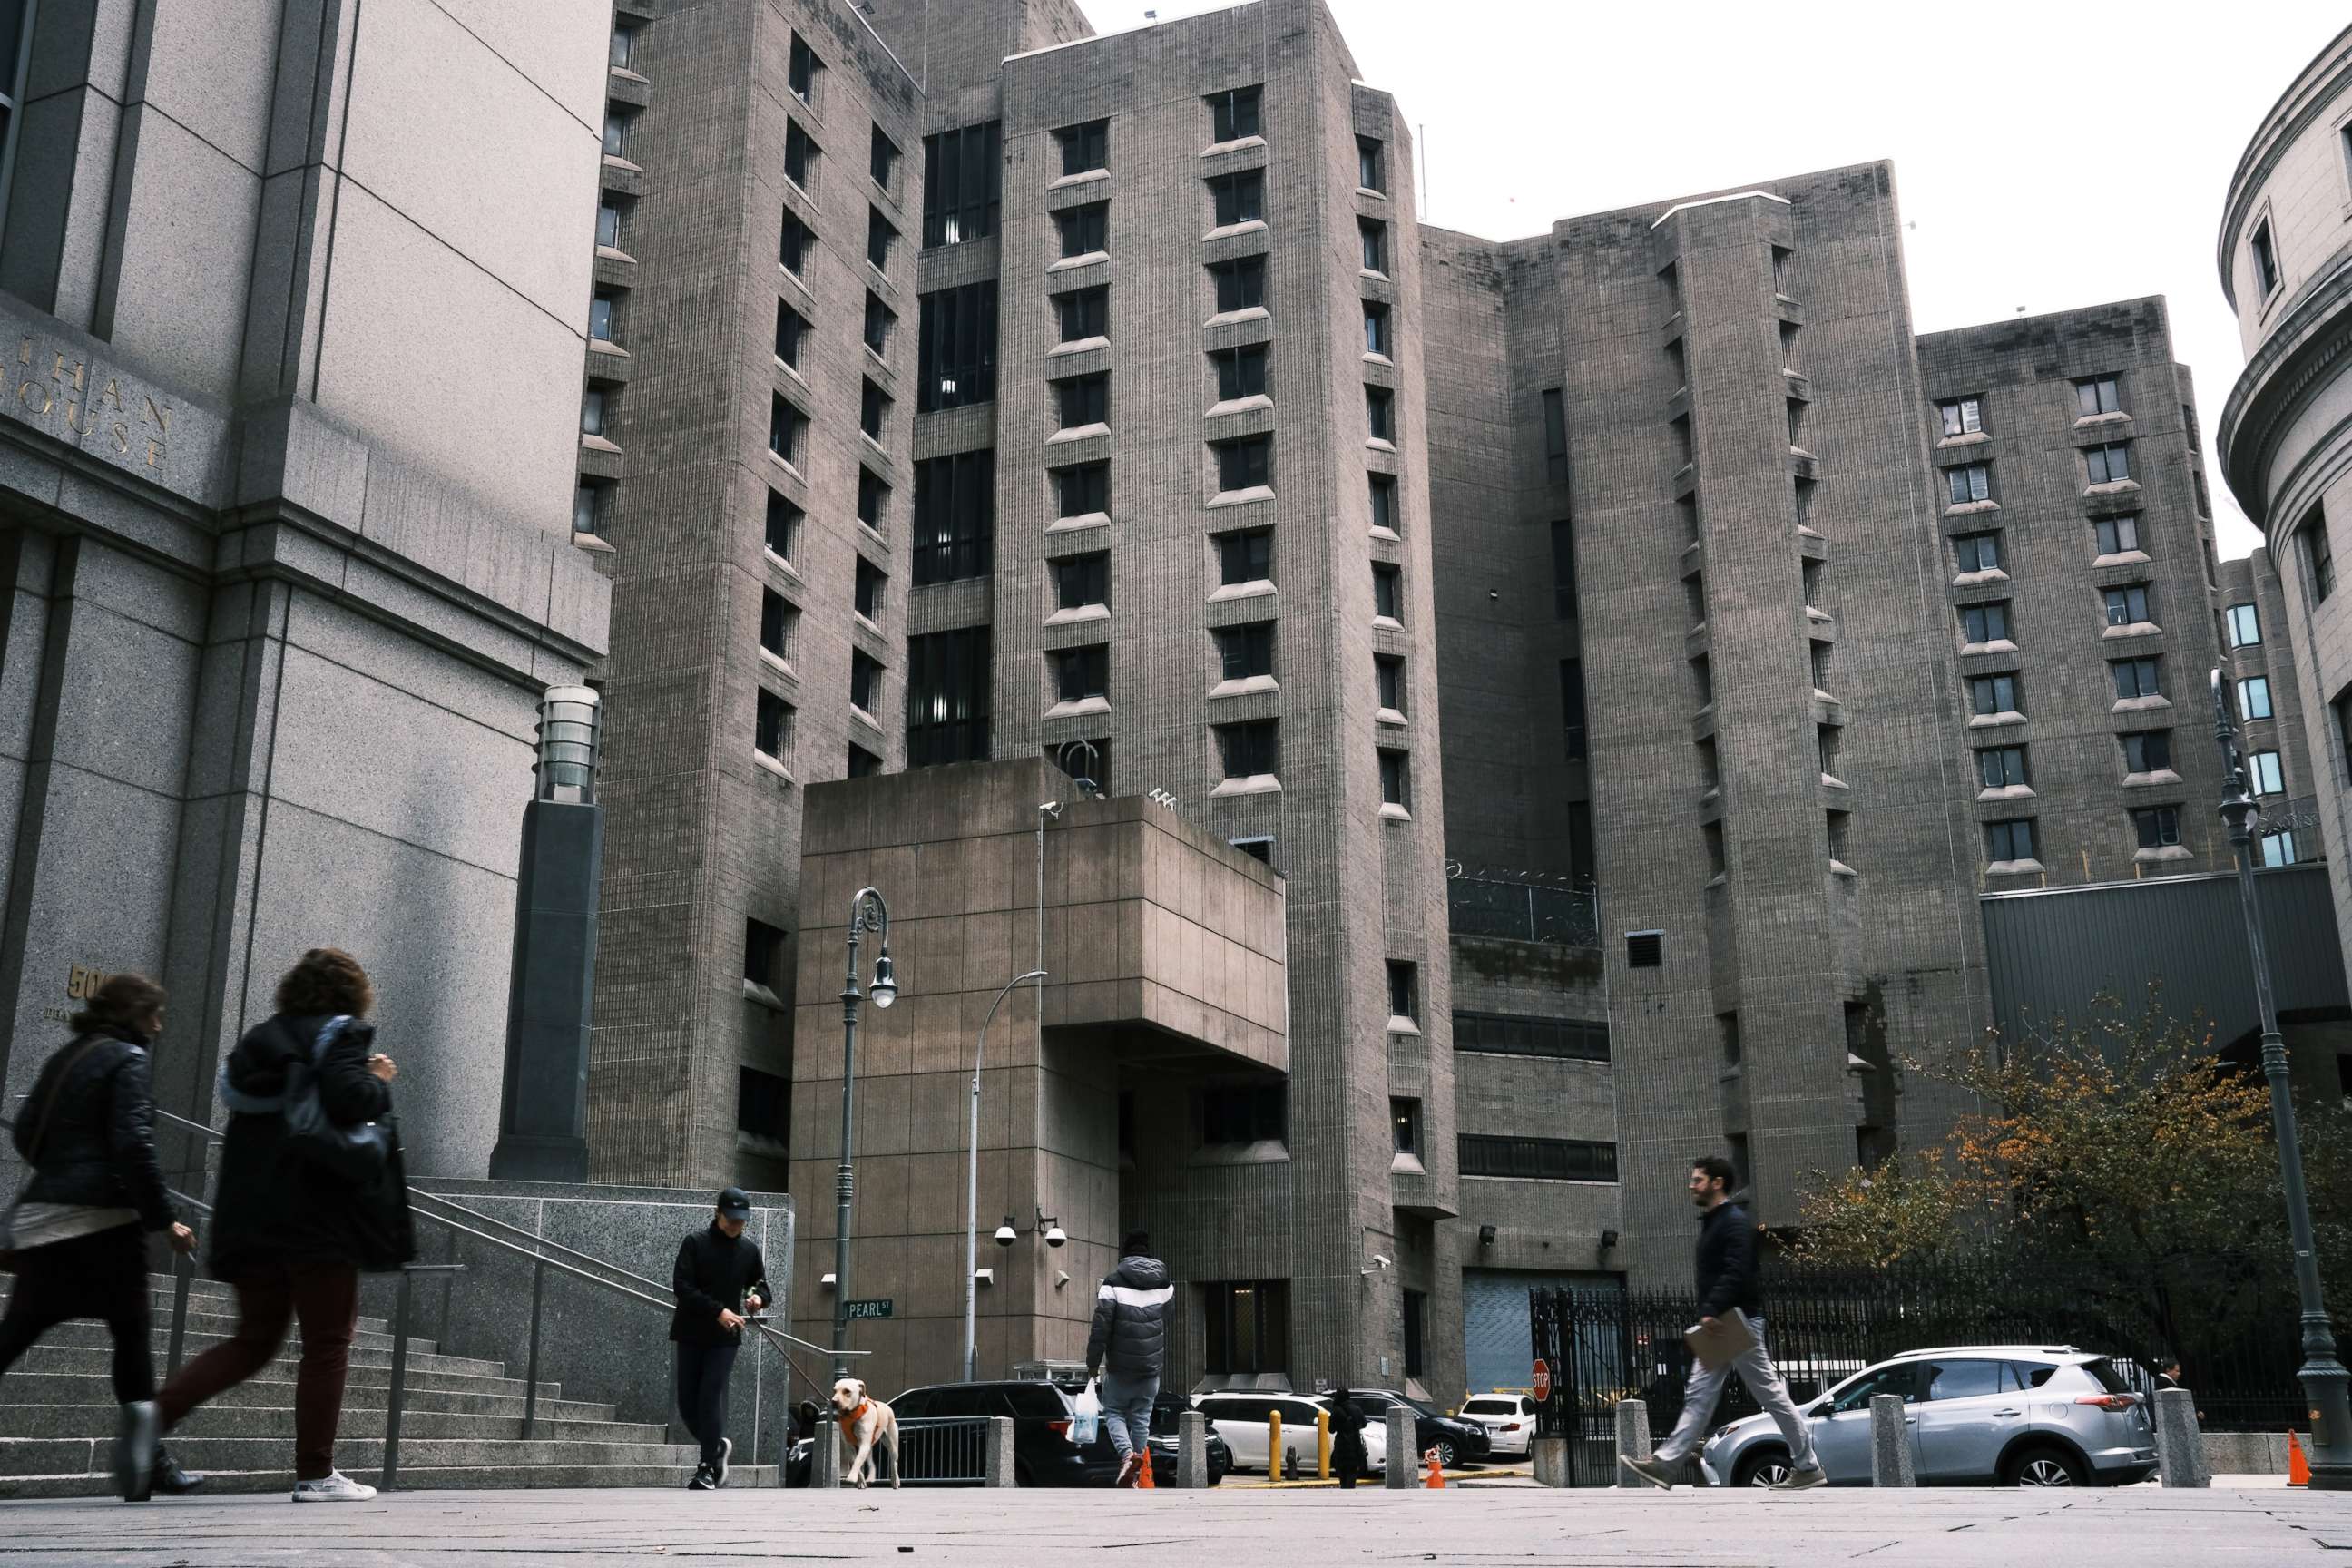 PHOTO: File photo of the Metropolitan Correctional Center, which is operated by the Federal Bureau of Prisons, in lower Manhattan of New York City on Nov. 19, 2019